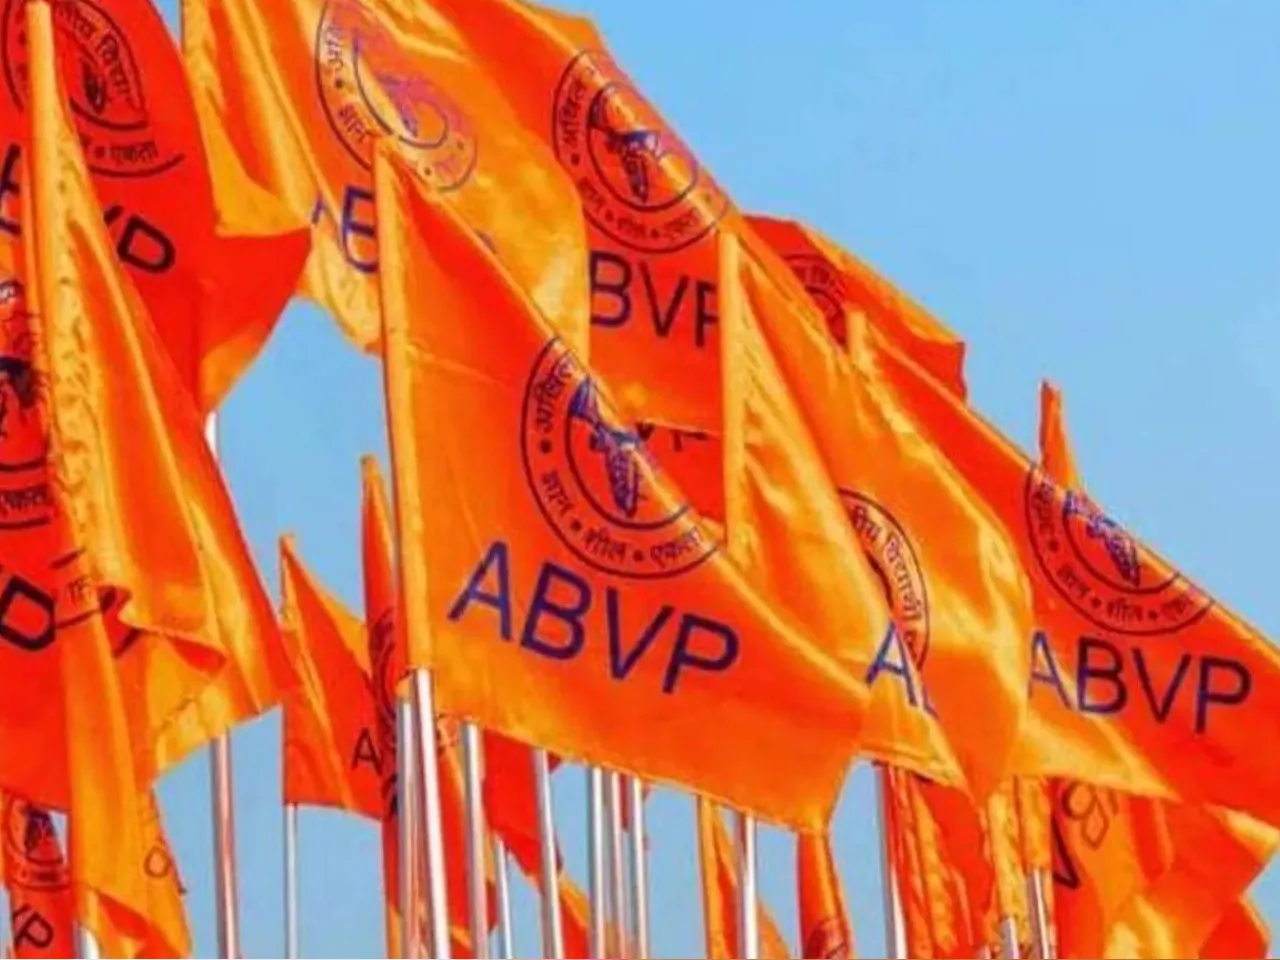 Tension on College Street over ABVP rally